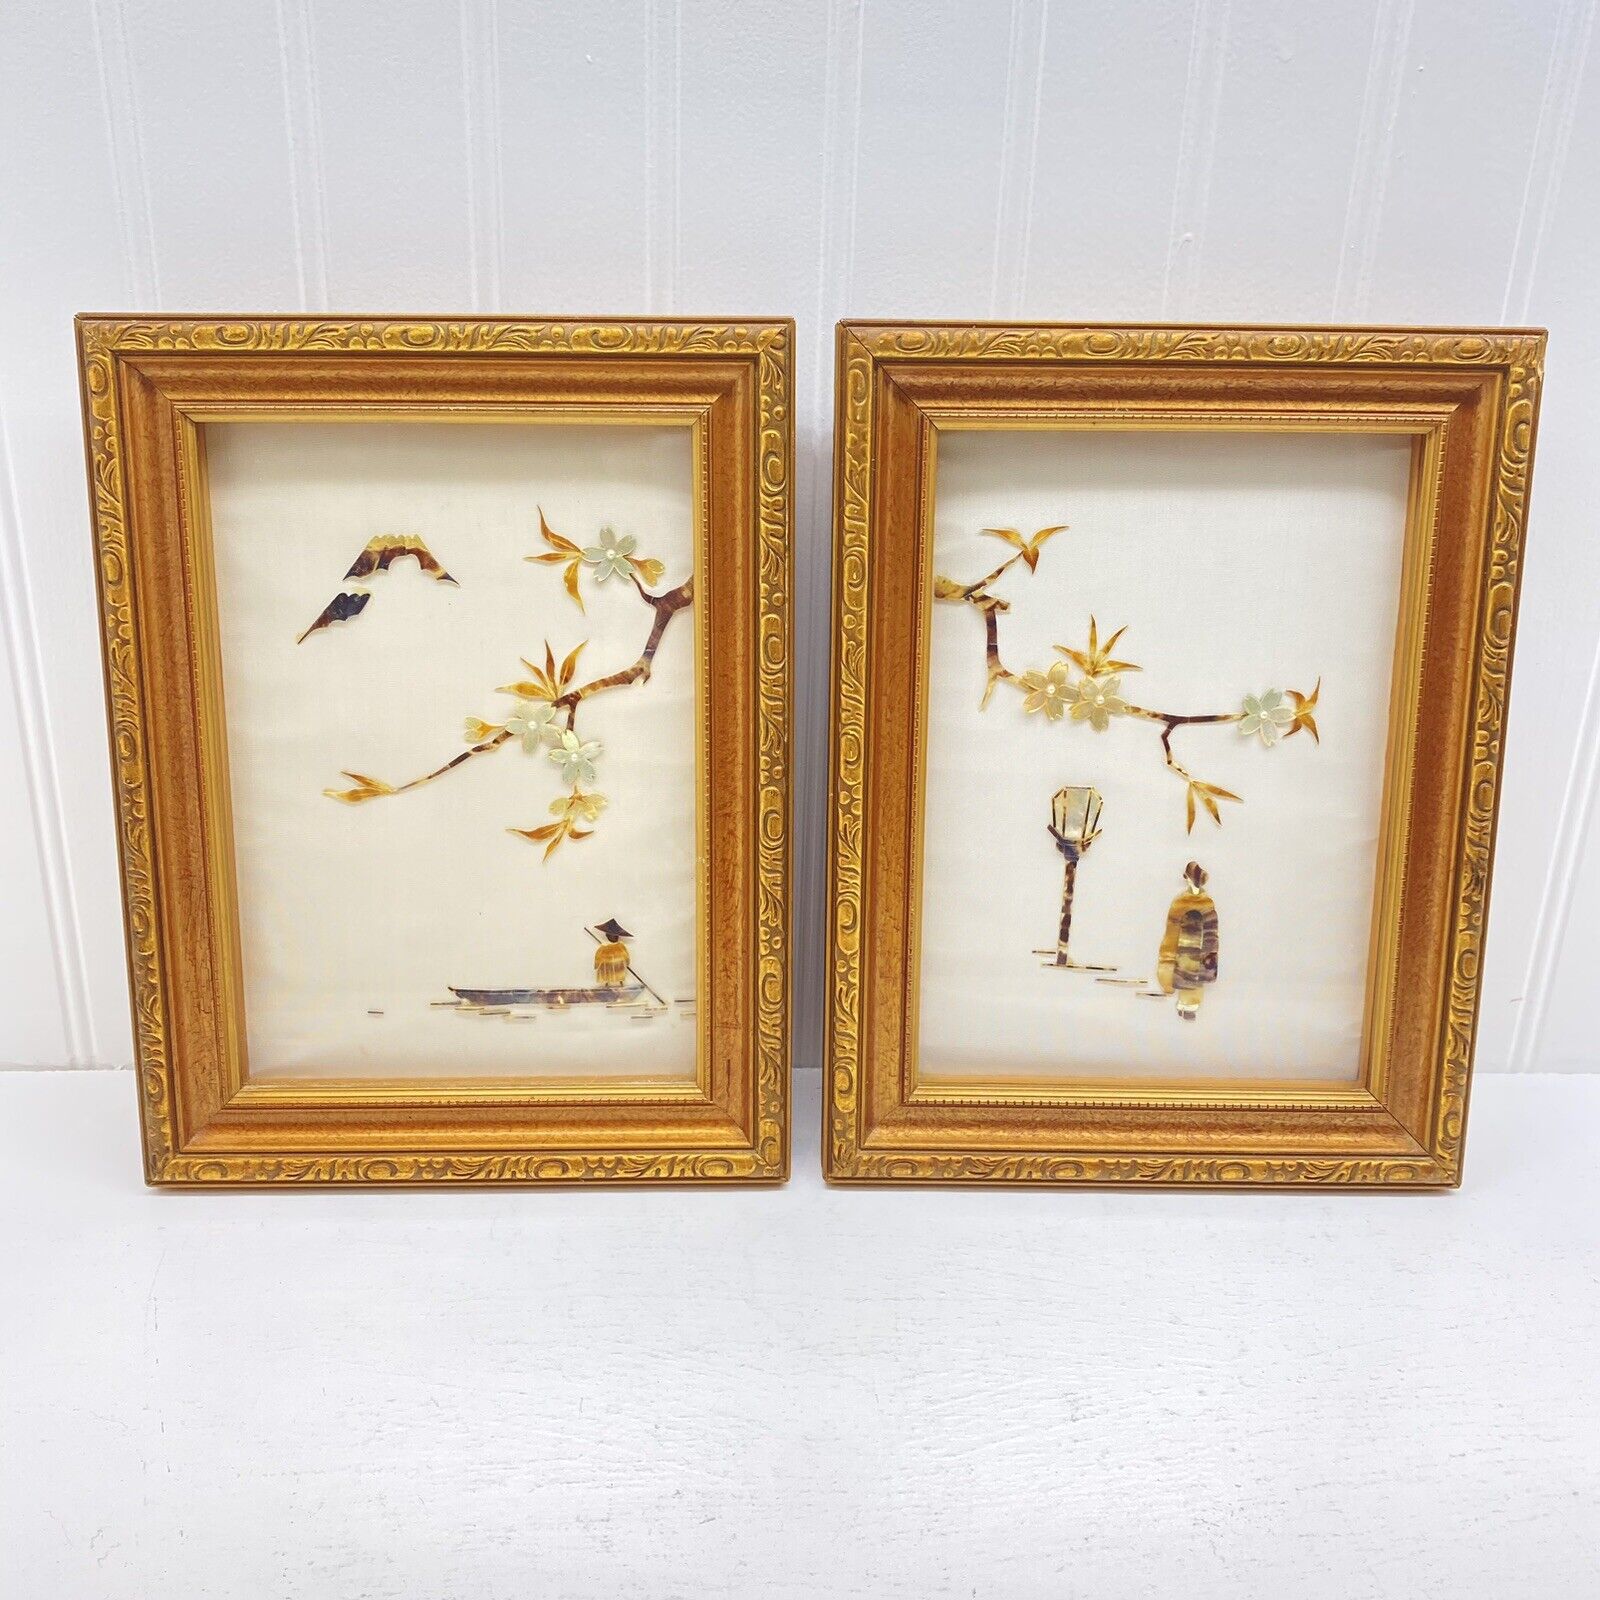 2 Vintage Framed Chinese shell Art Home Decorative Wall Hanging